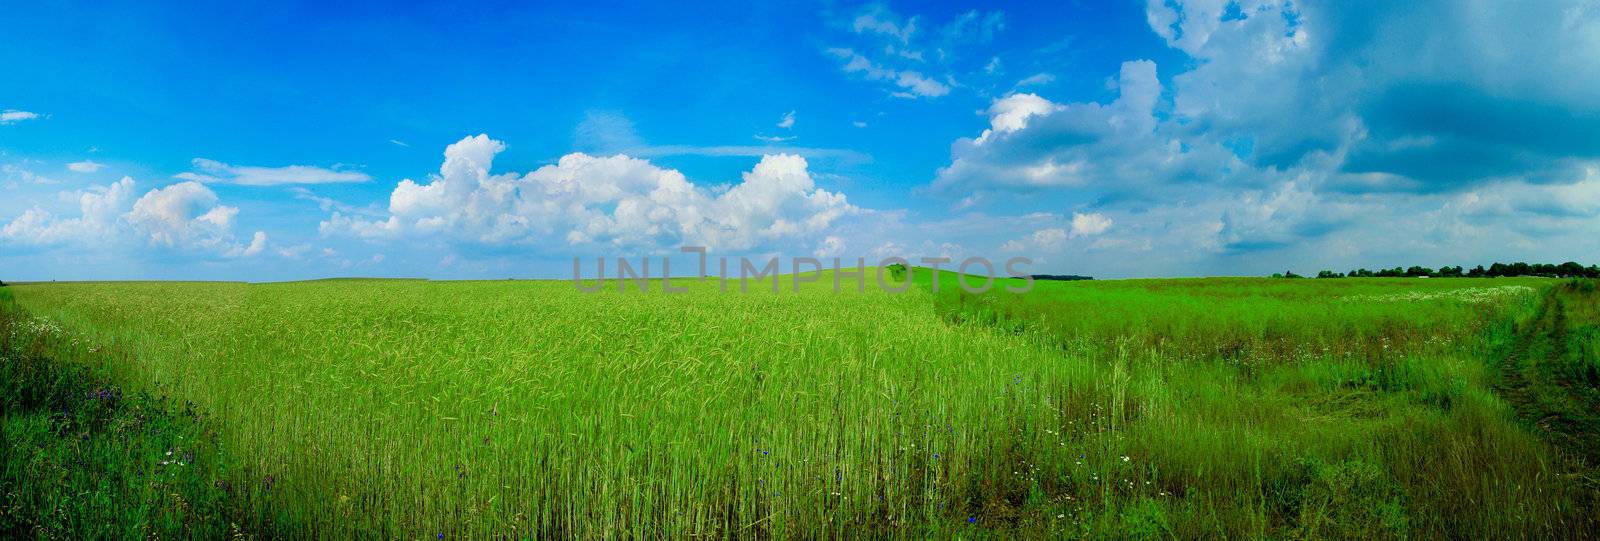 An image of a green field and blue sky